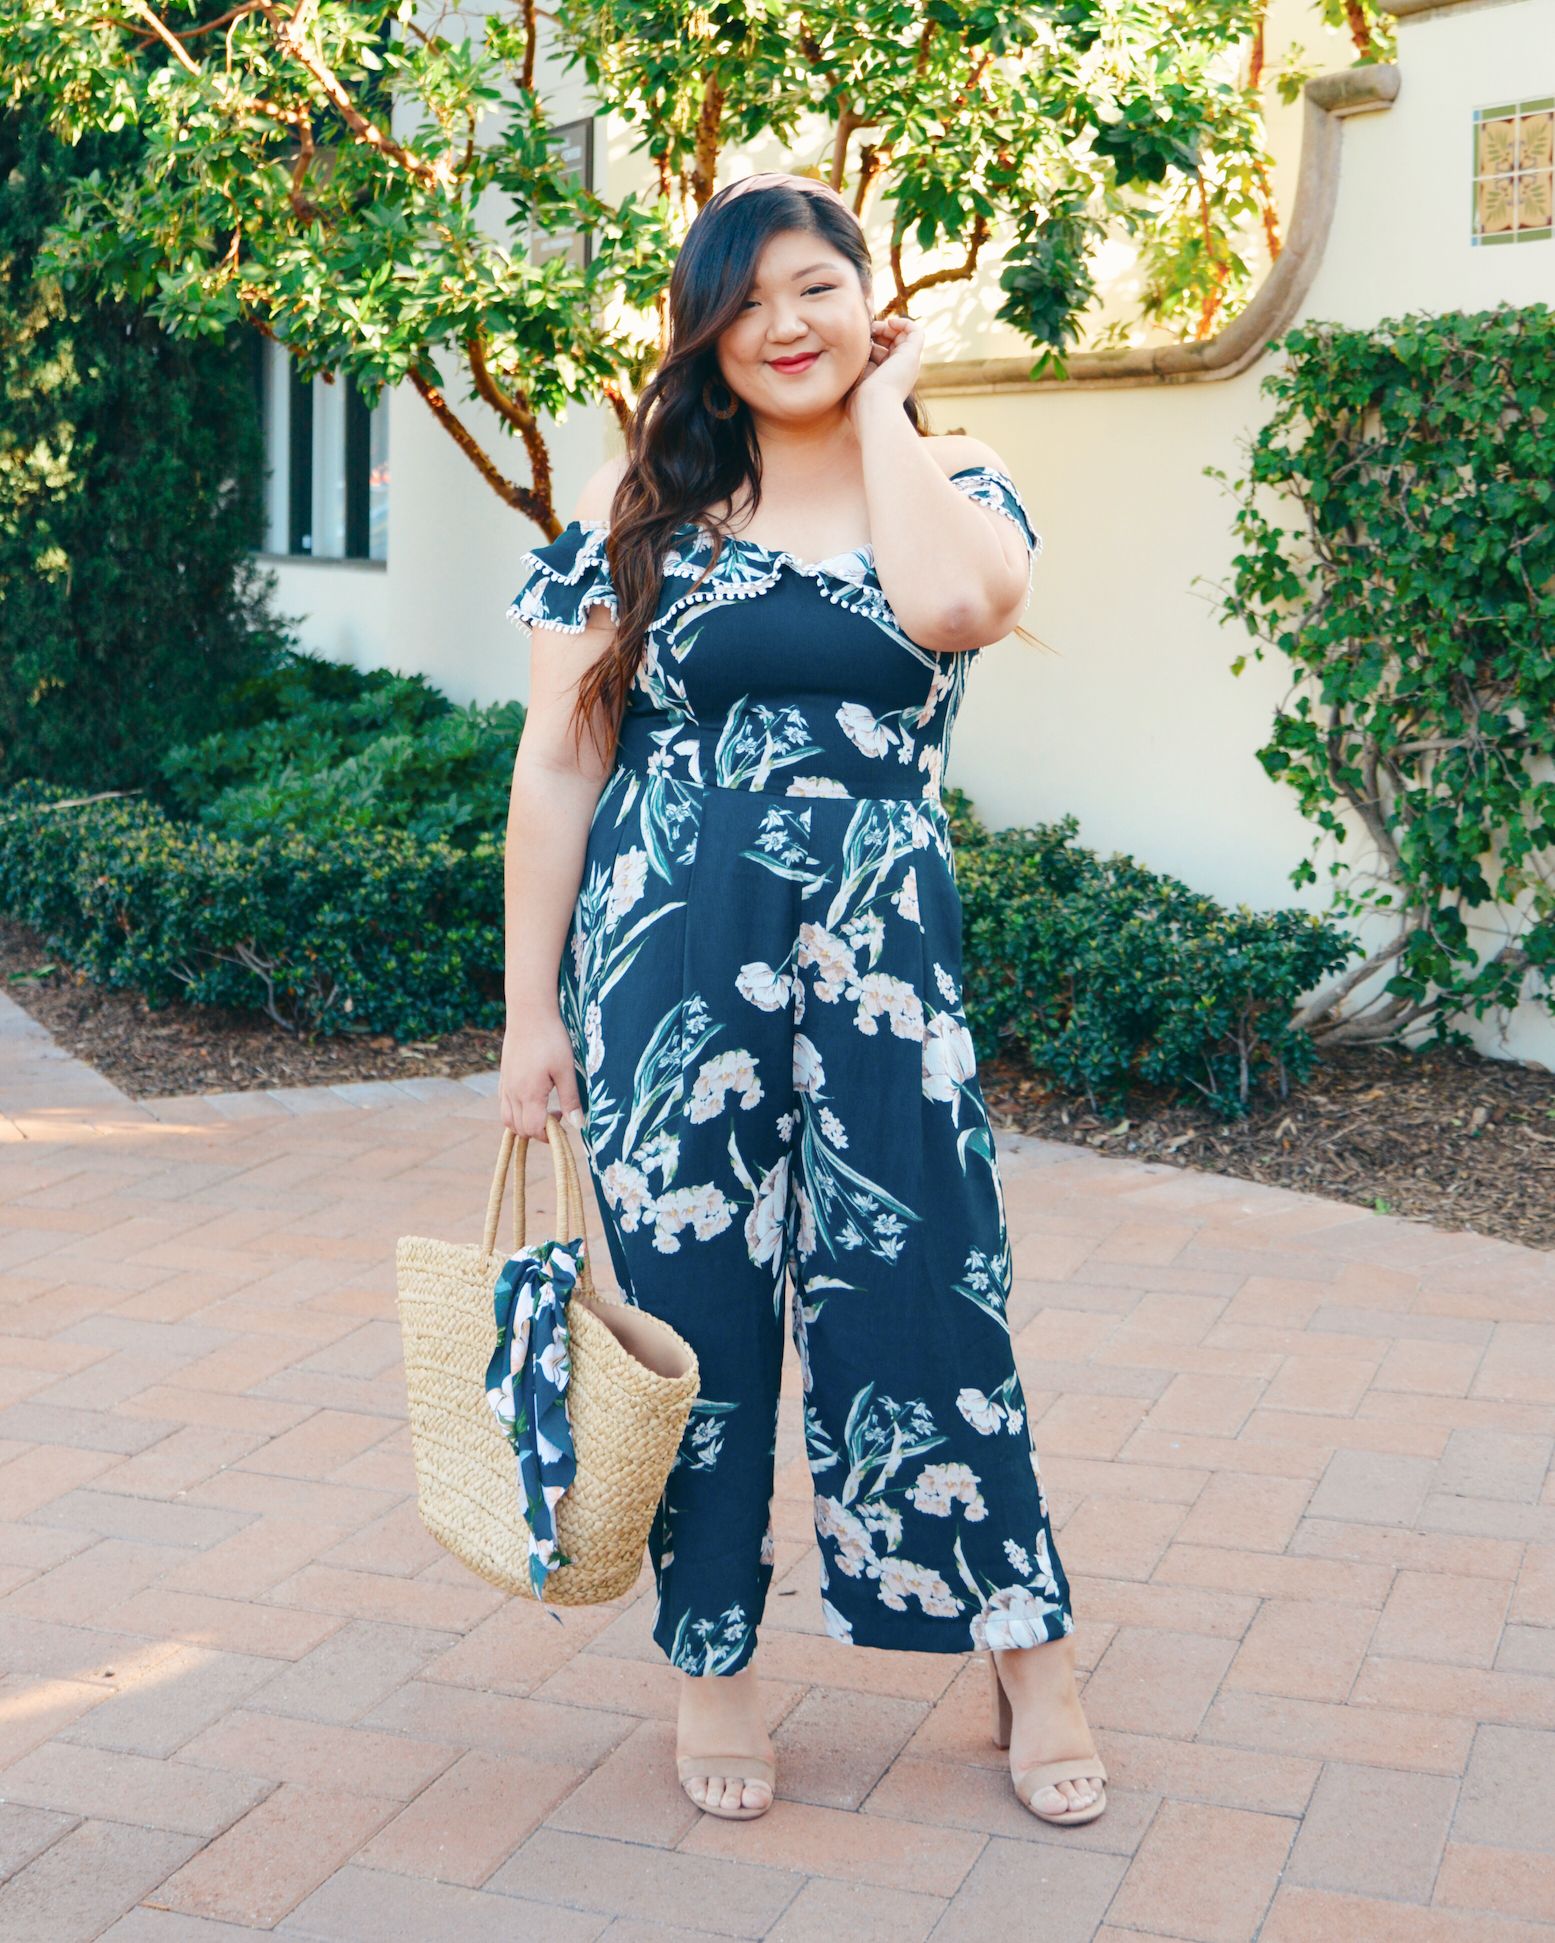 best summer outfits for curvy figures